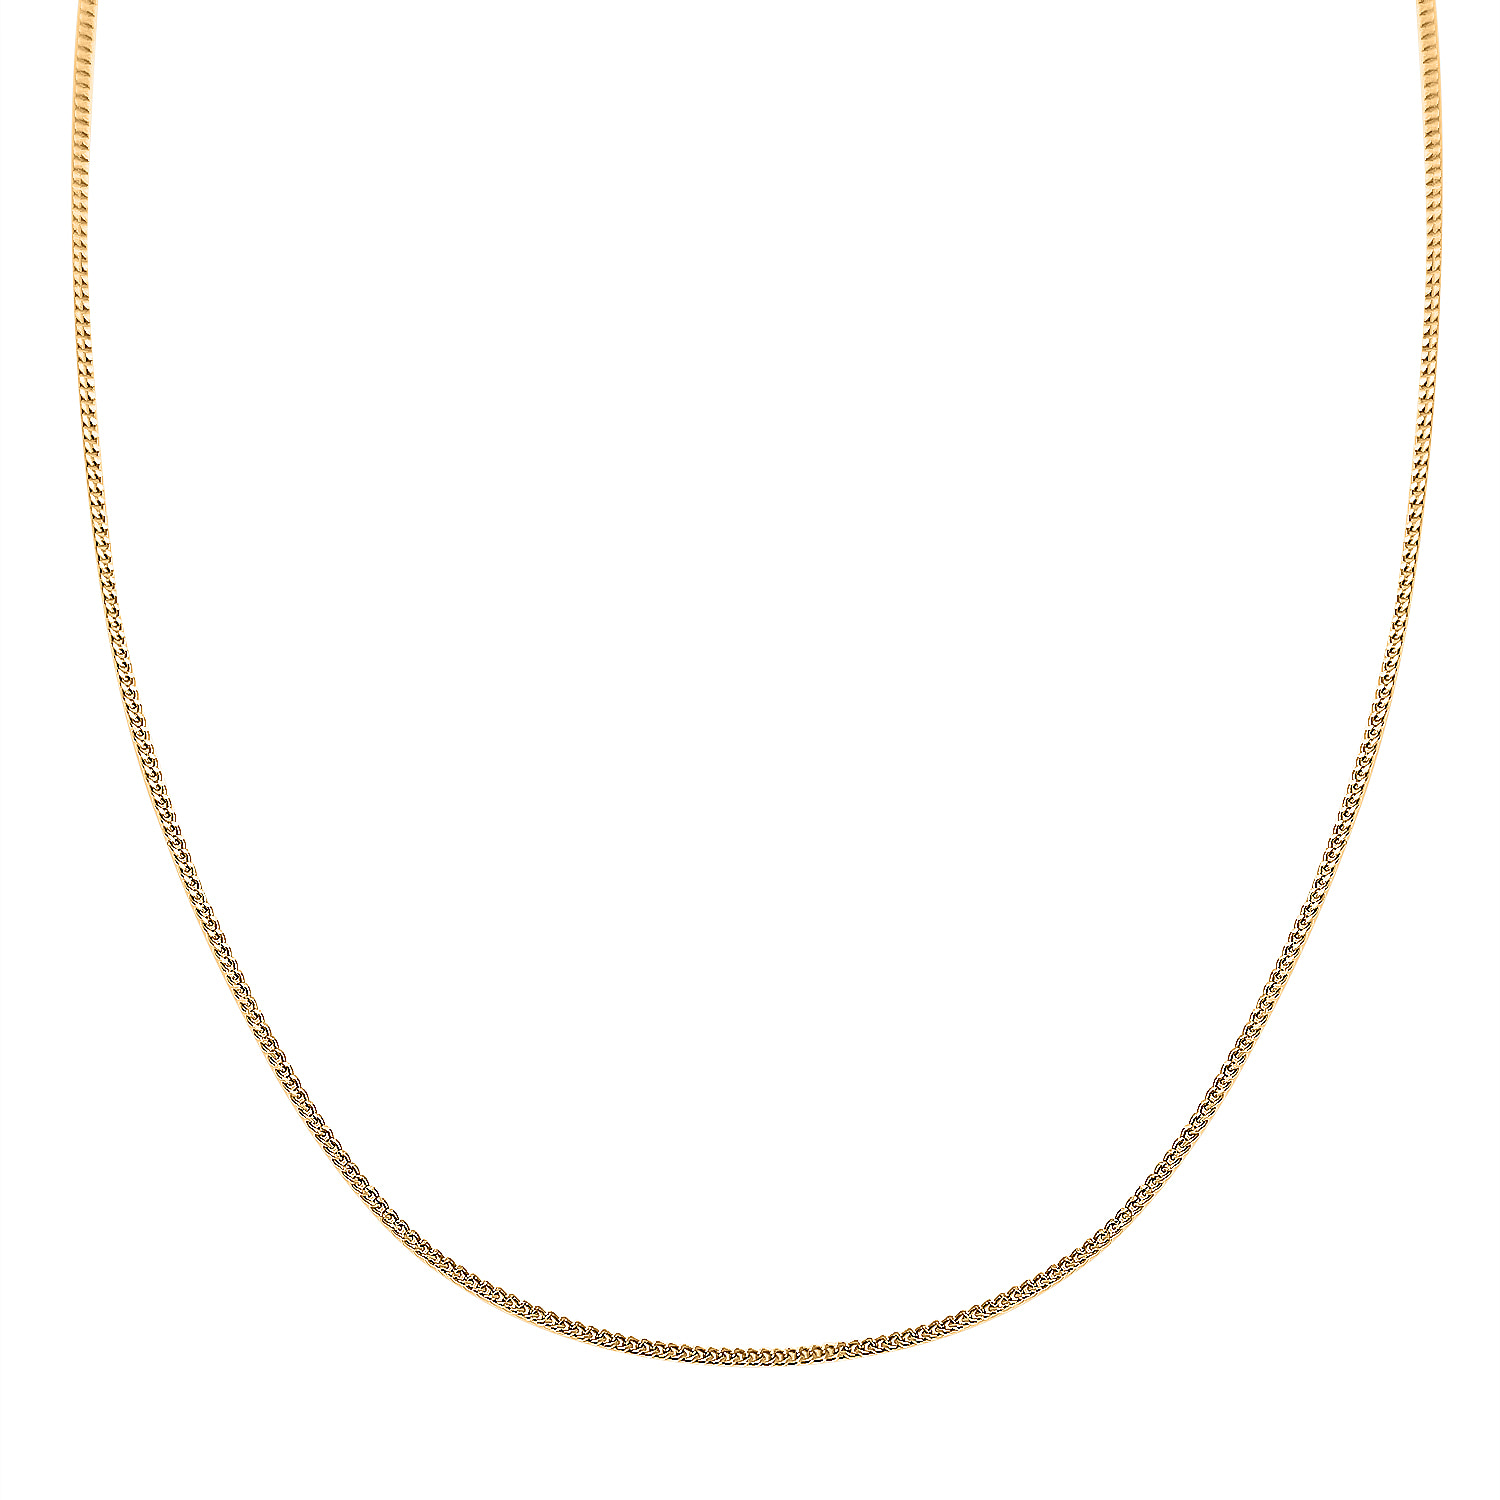 One Time Deal - 18K Yellow Gold Diamond Cut Curb Necklace (Size - 18)